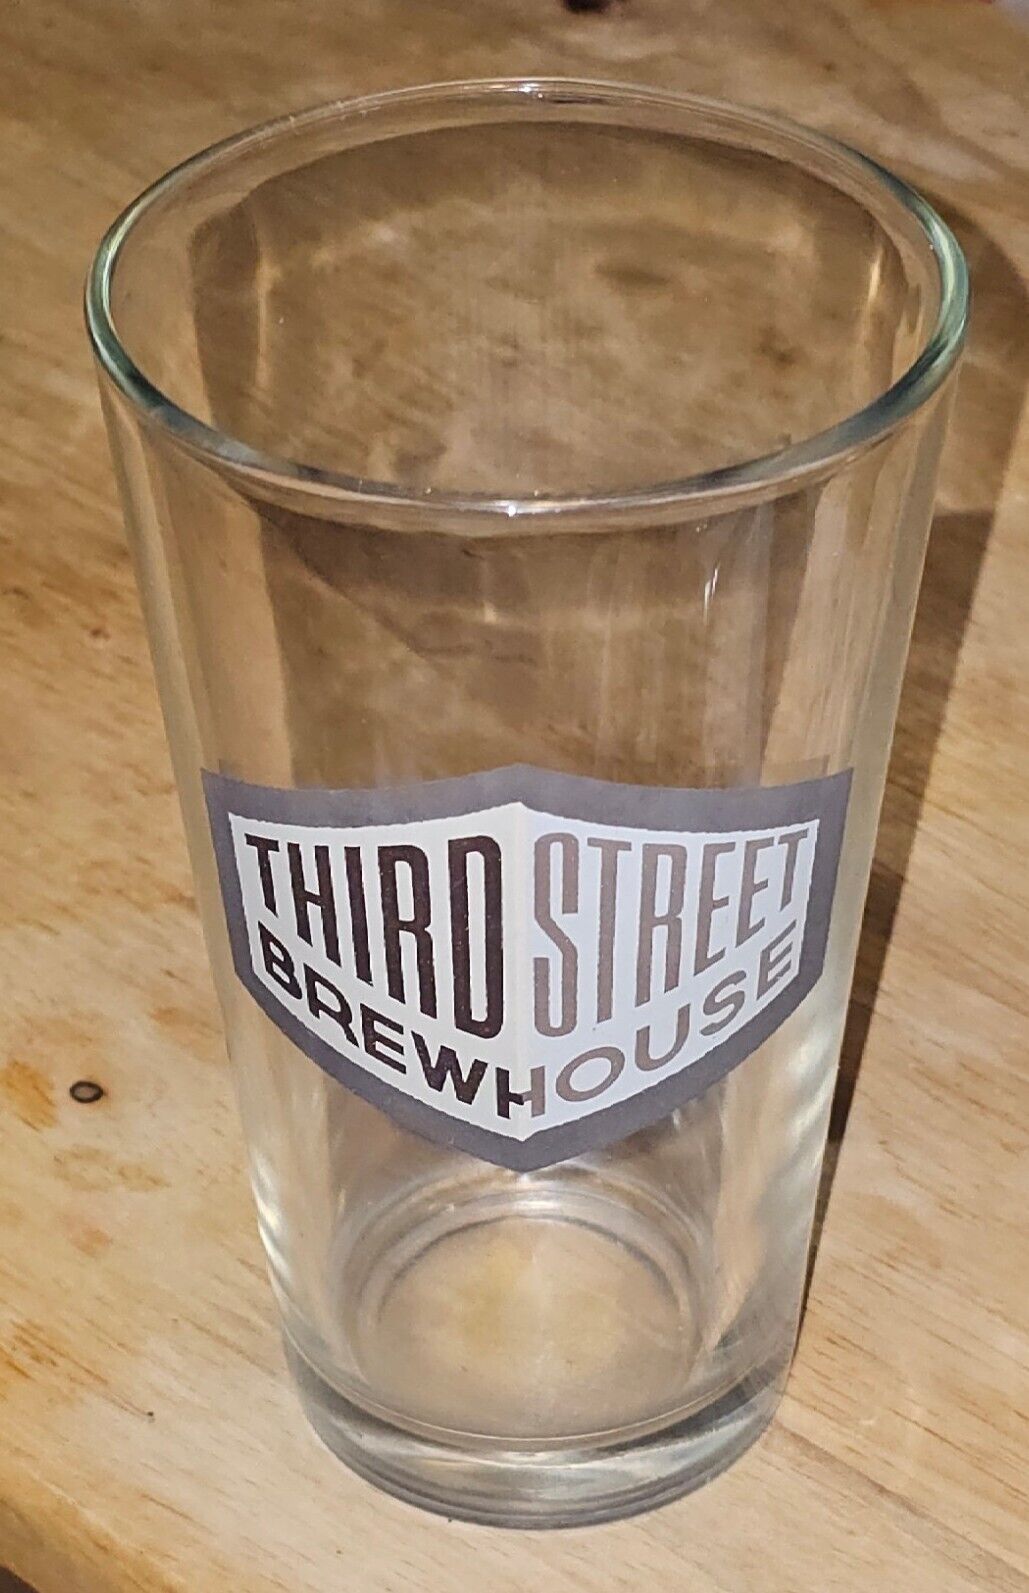 Third Street Brewhouse Pint Beer Glass